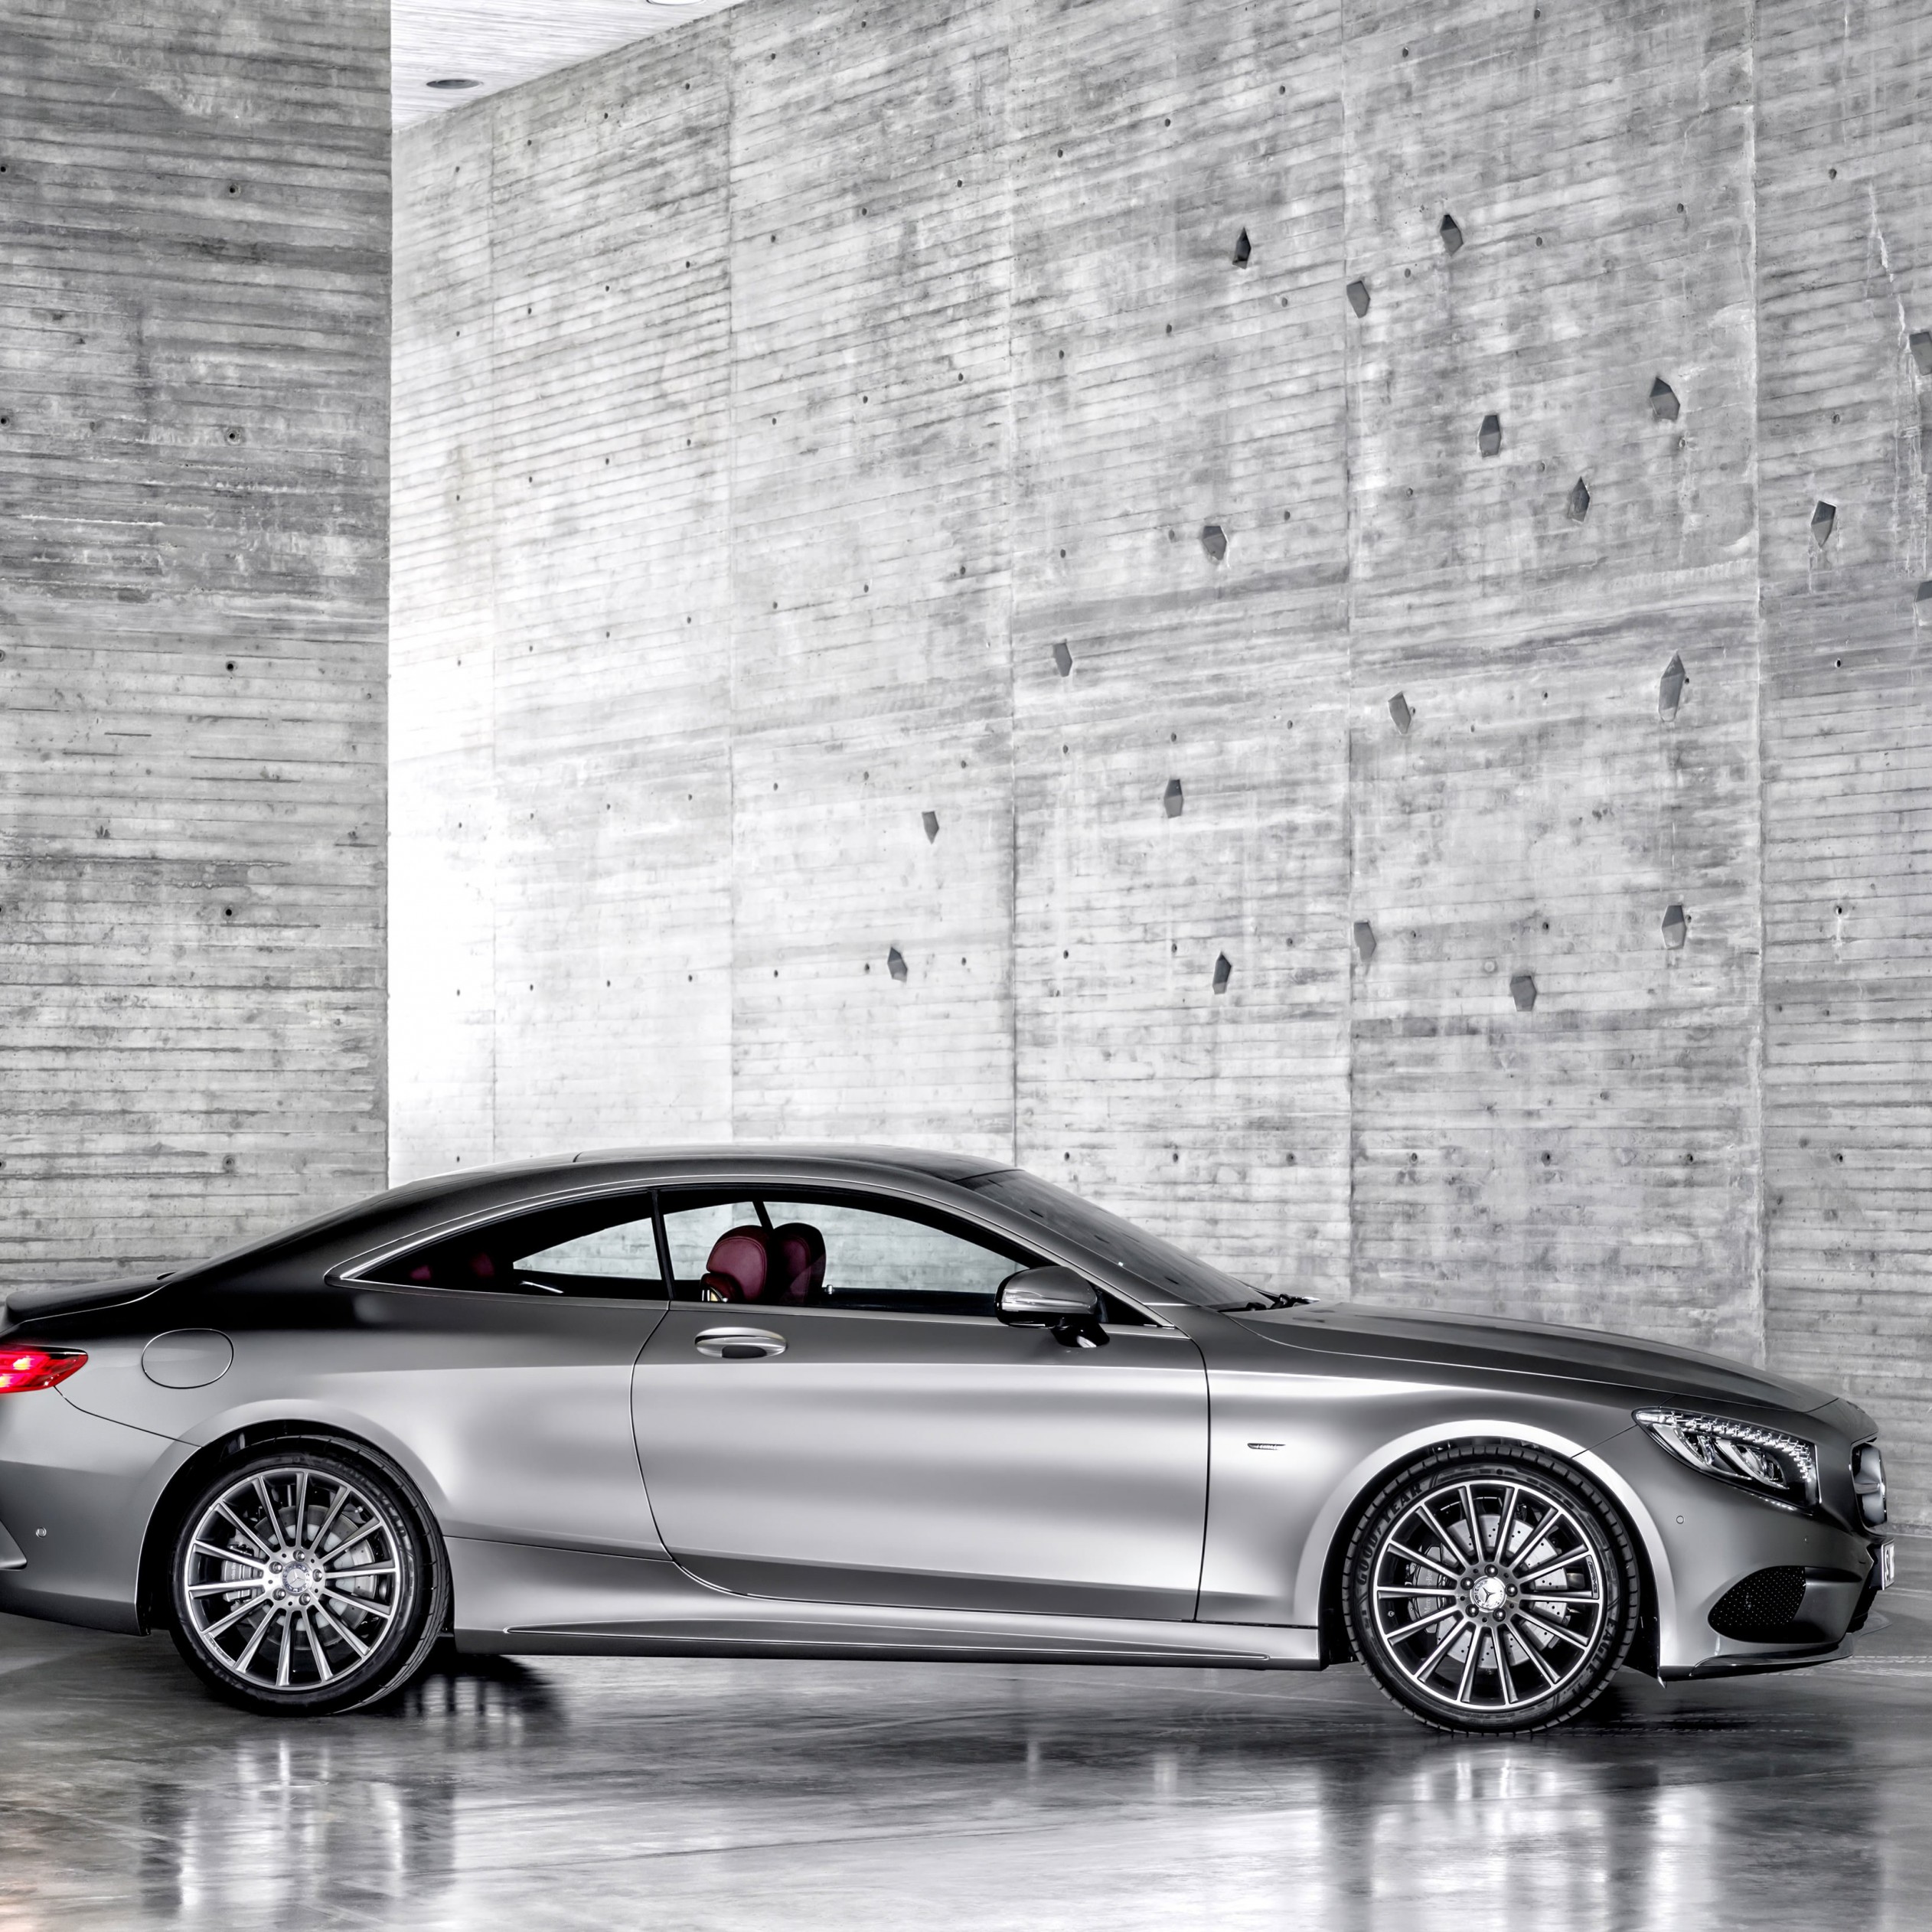 2015 Mercedes-Benz S-Class Coupe Wallpaper for Apple iPad Air